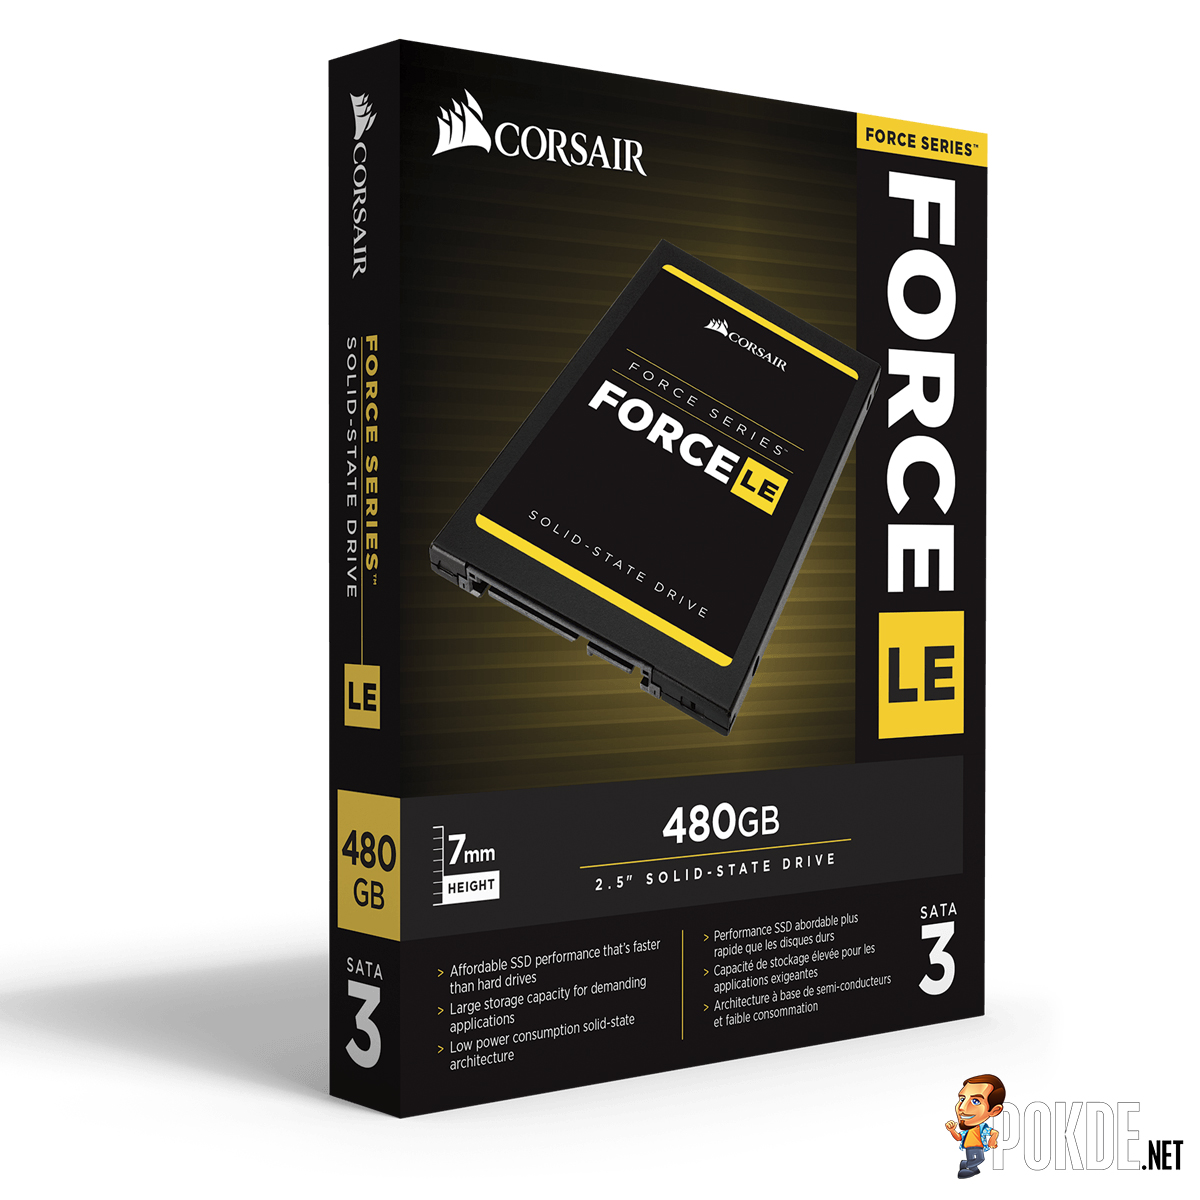 Corsair Force LE SSD is now available in Malaysia 33